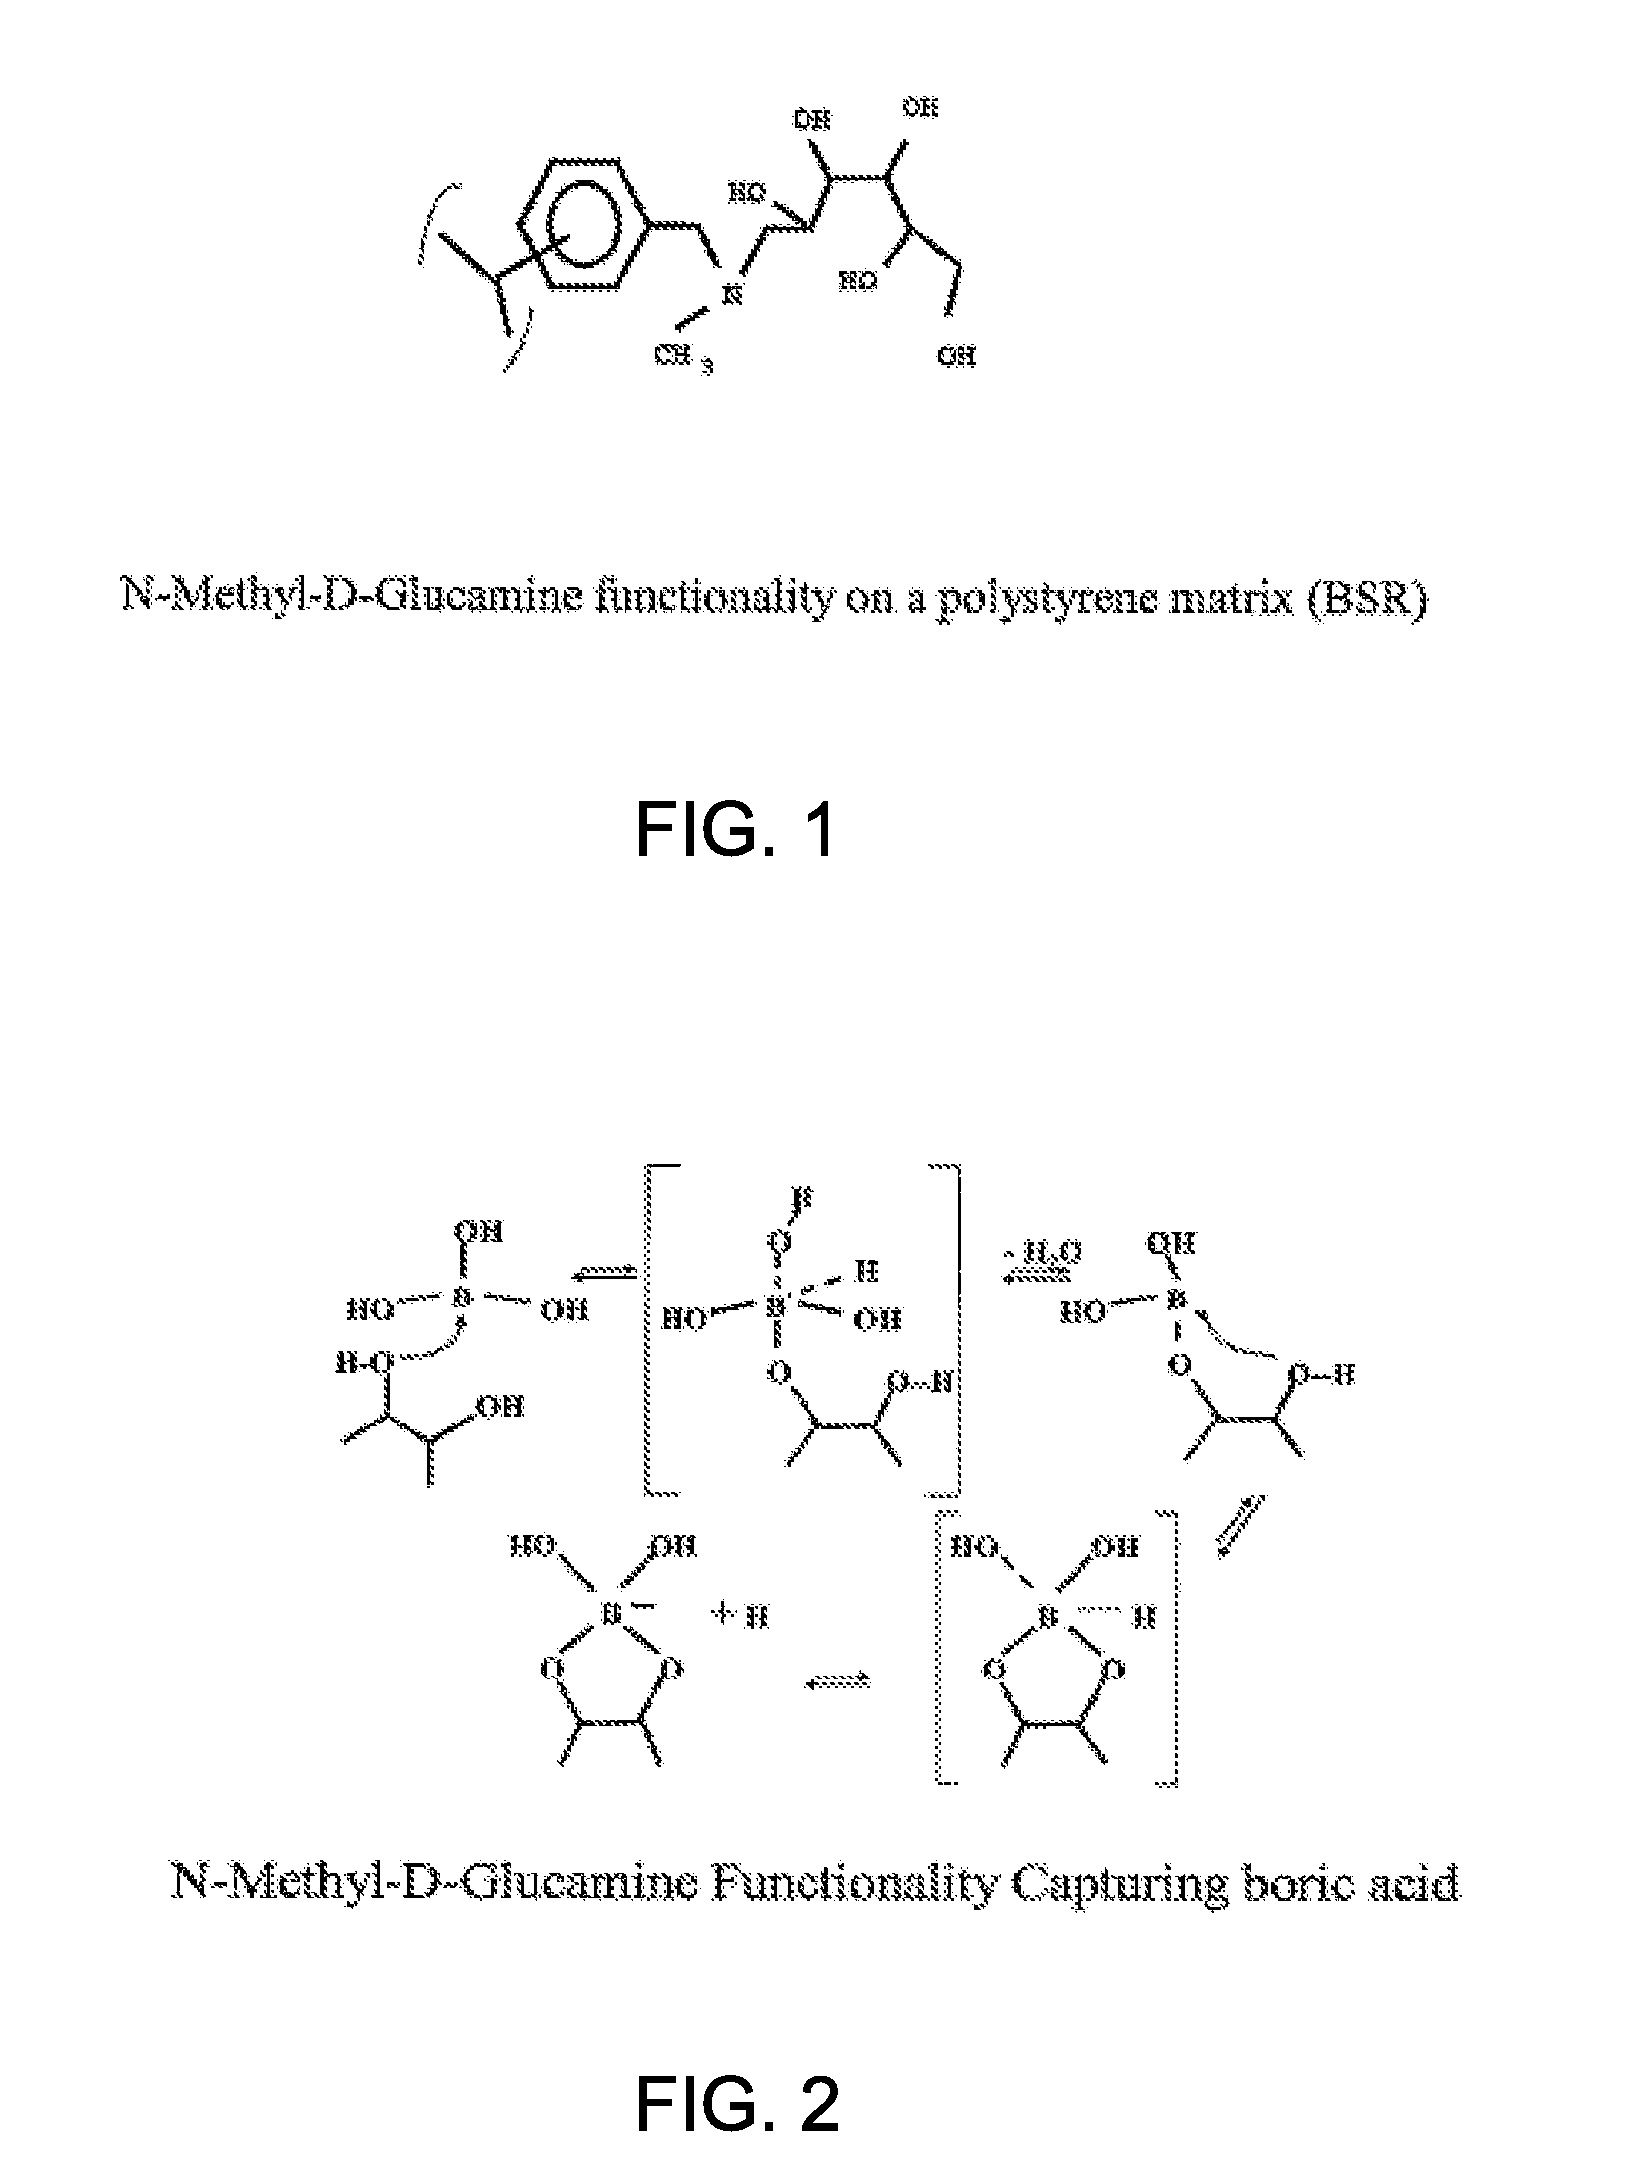 Method for removing organic contaminants from resins